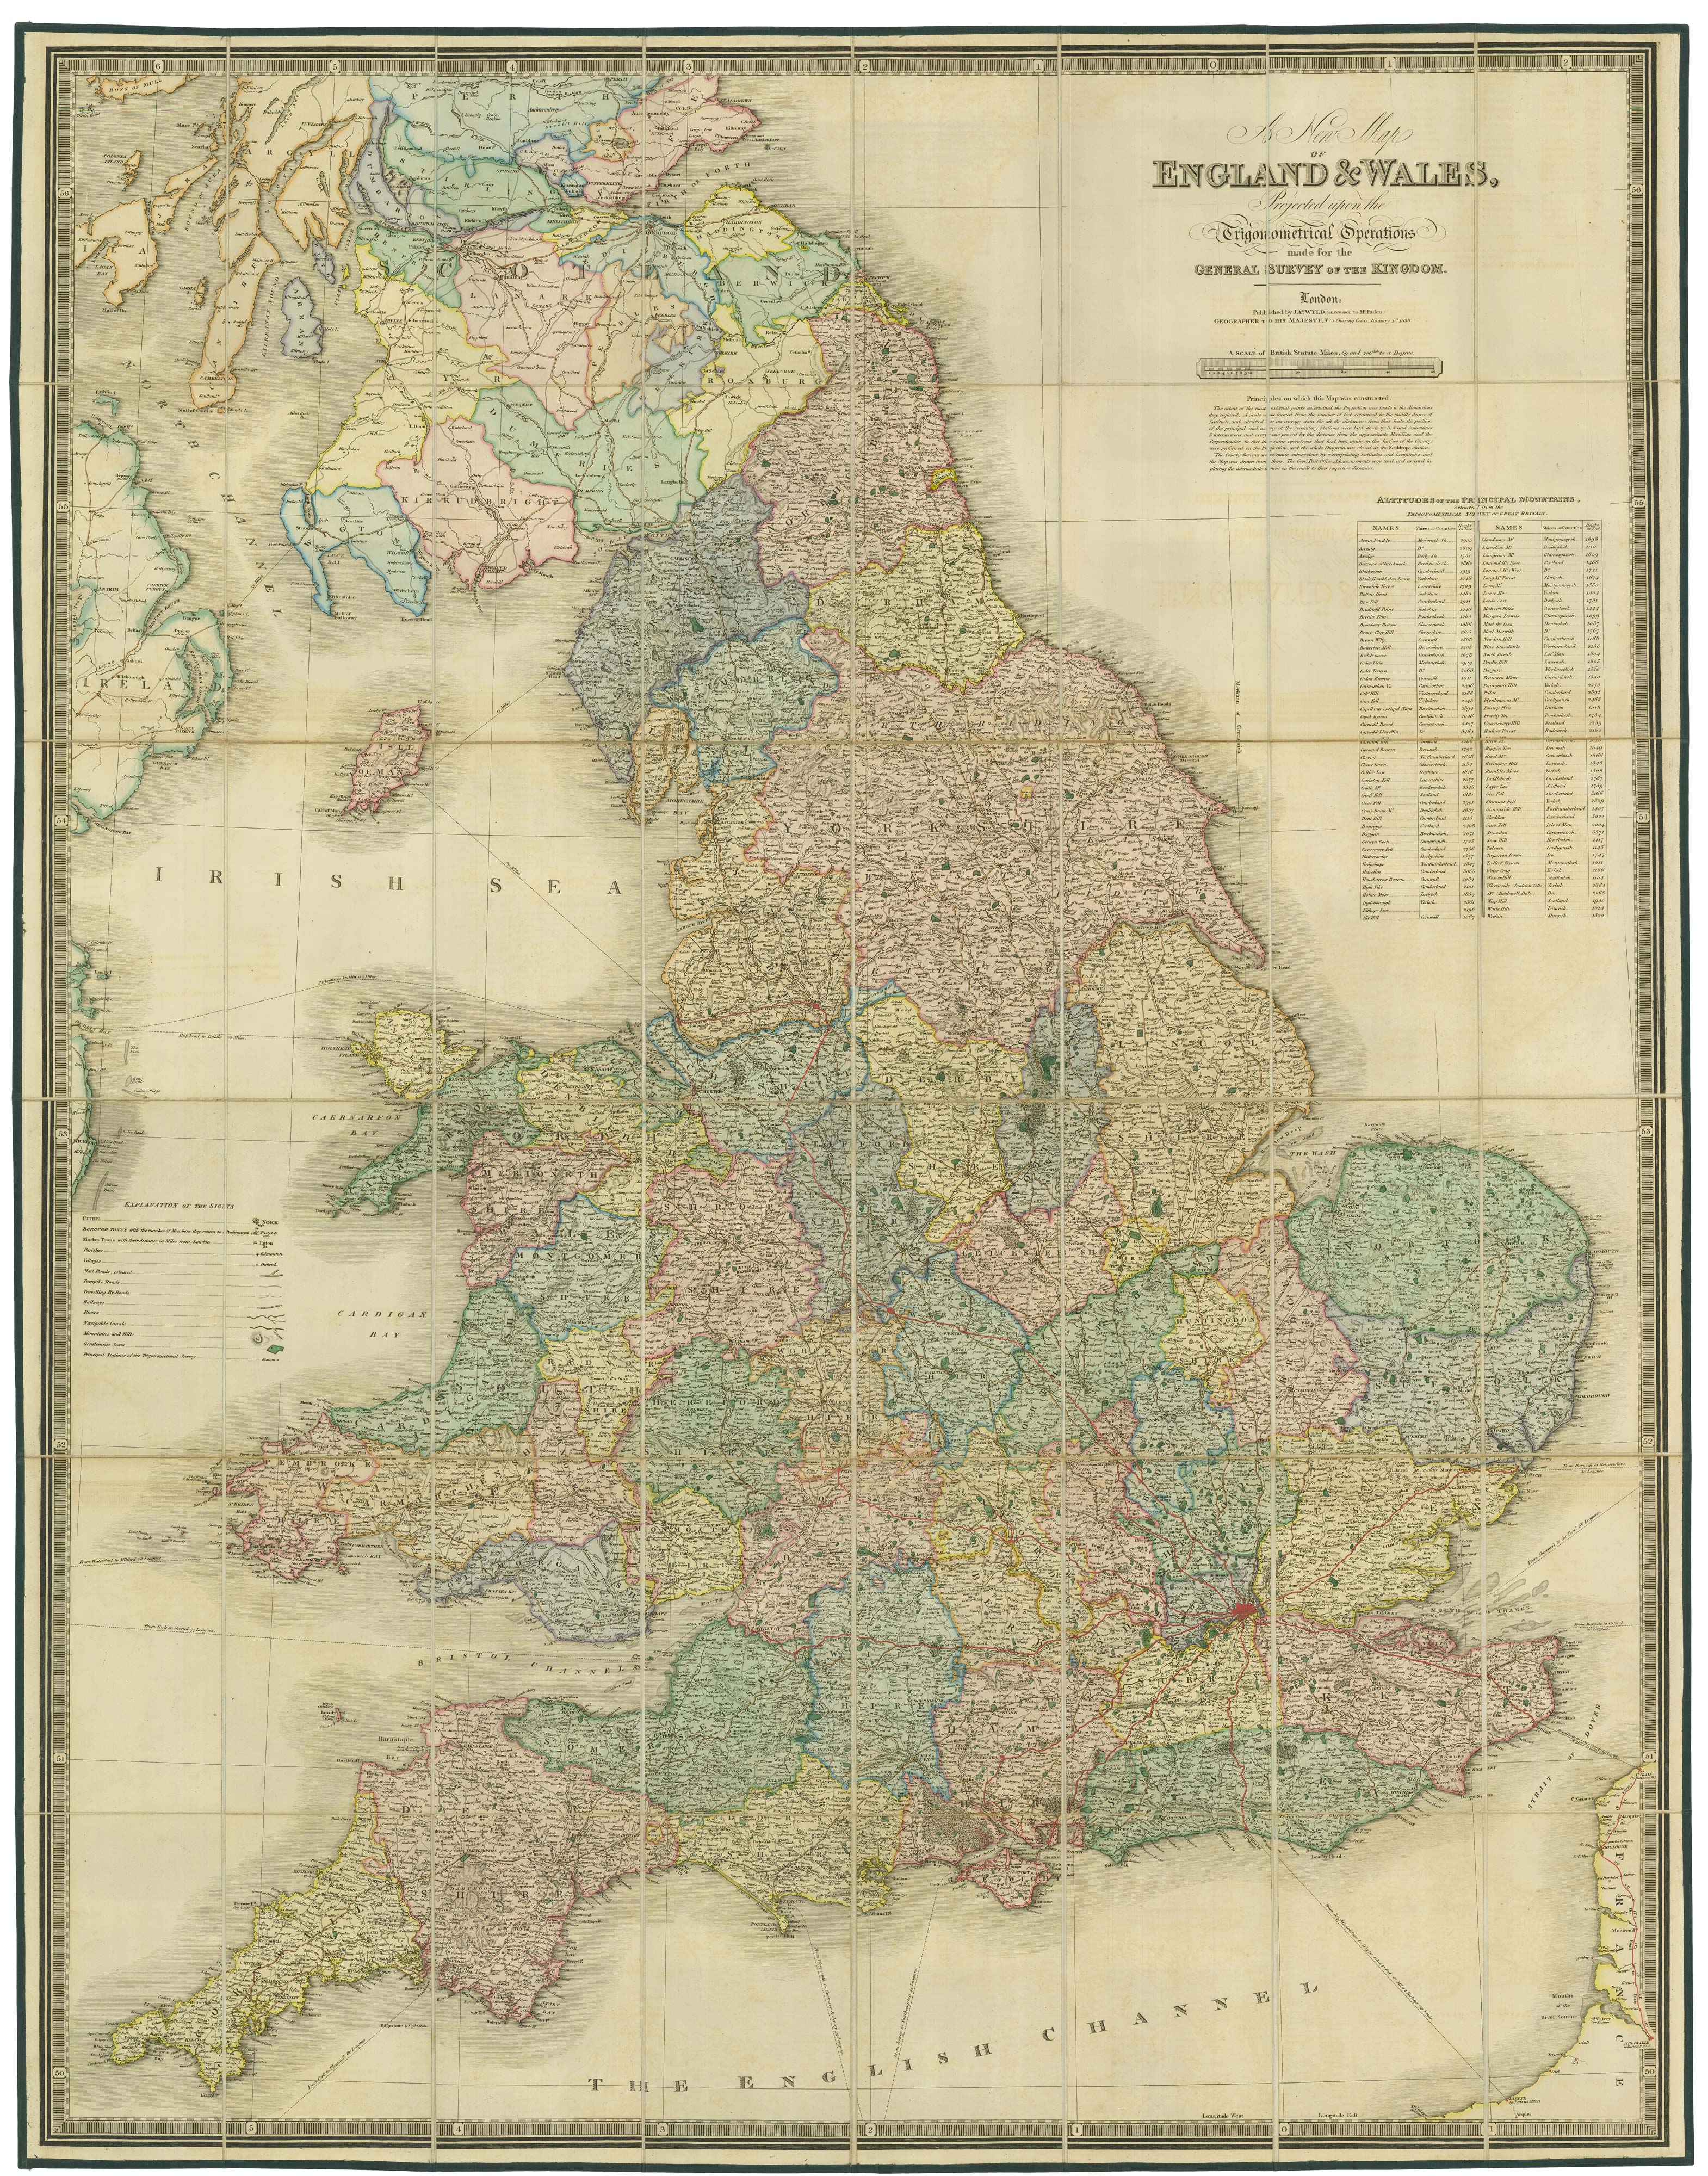 A New Map of England & Wales Projected upon the Trigonometrical Operations made for the General Survey of the Kingdom.